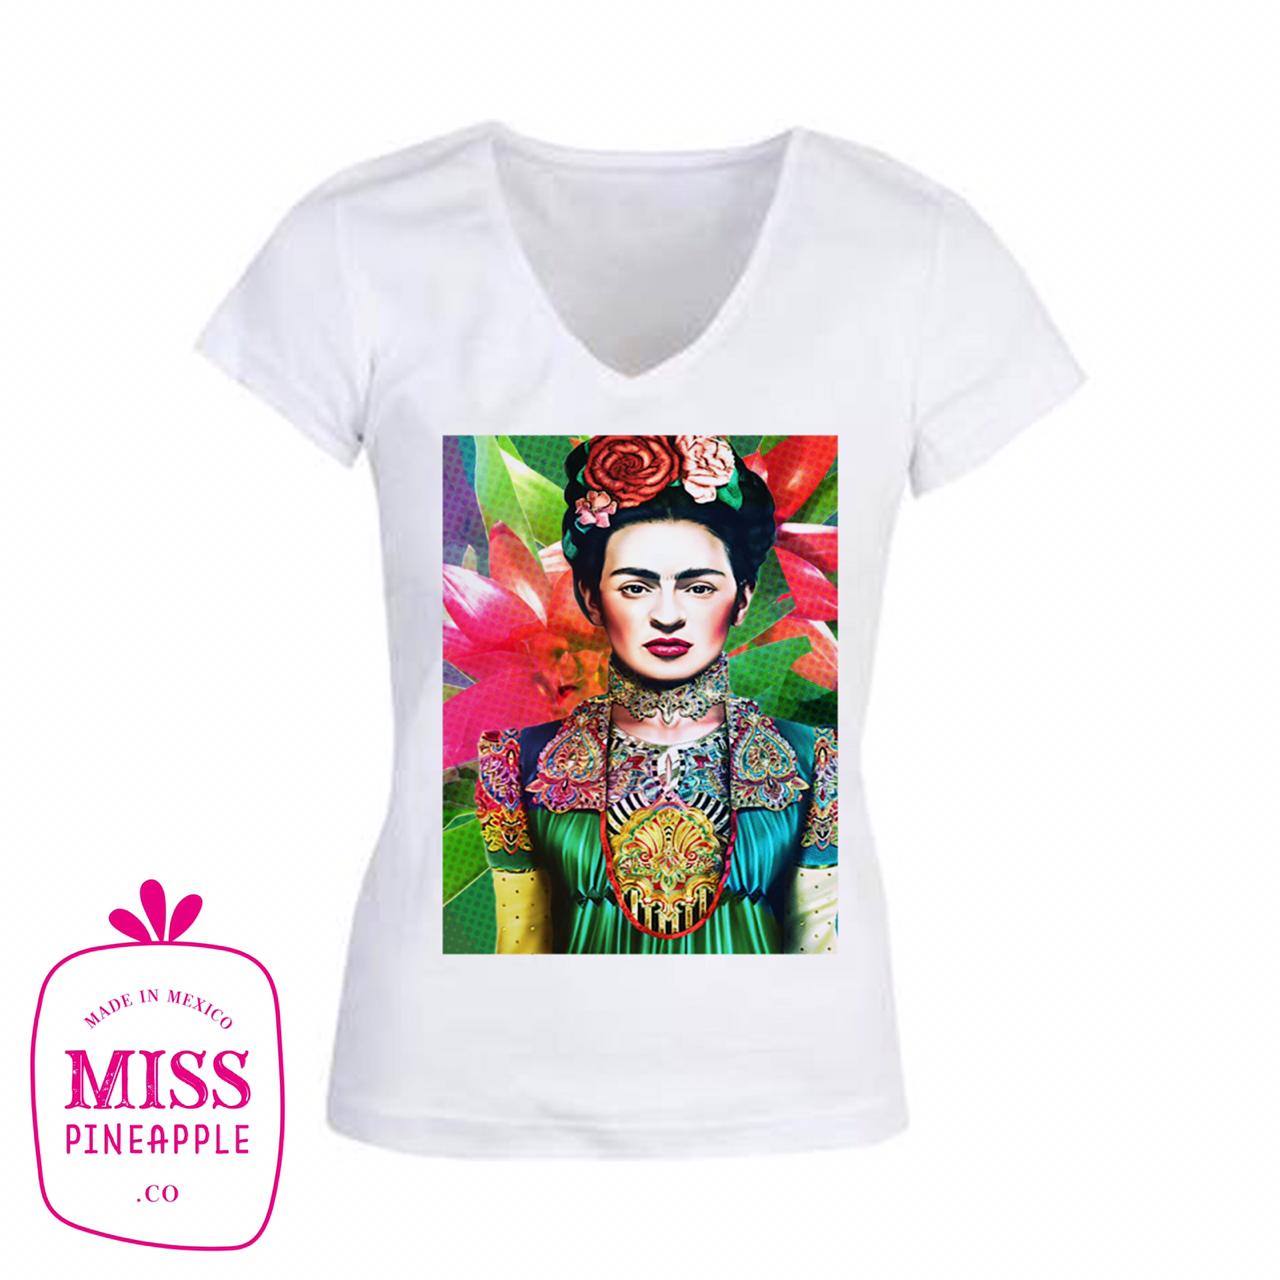 – - Collection Women\'s T-Shirt Co Miss FRIDA Pineapple KAHLO